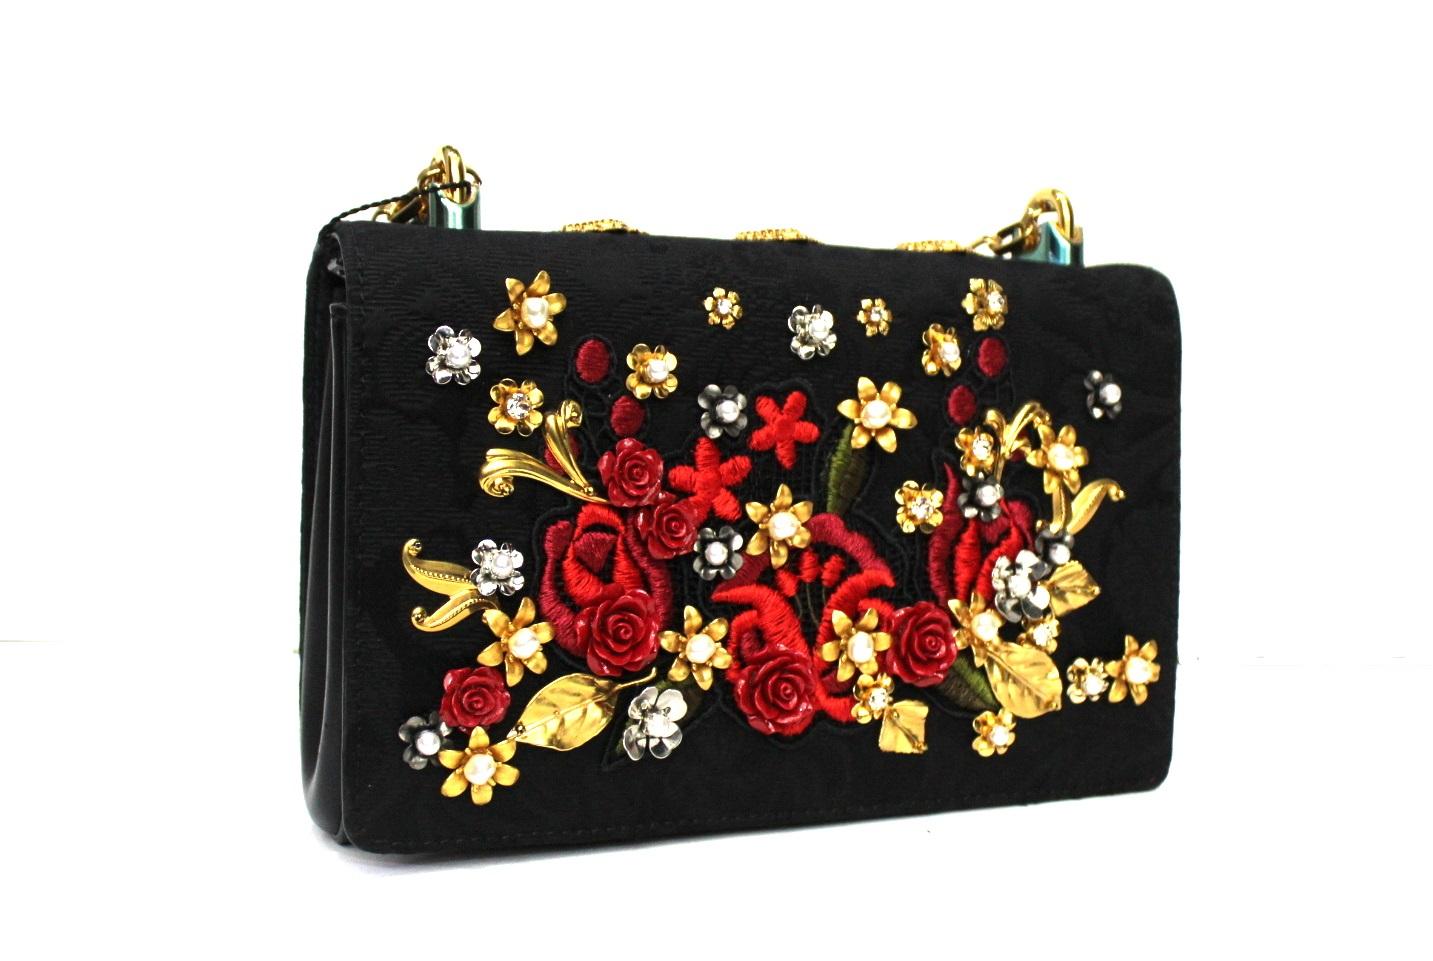 Very special Girls by D&G in black leather and fabric with sewn roses and metal appliqués. The hardware is gilded, with magnetic button closure, internally capacious for the essentials. Removable shoulder strap to wear it however you